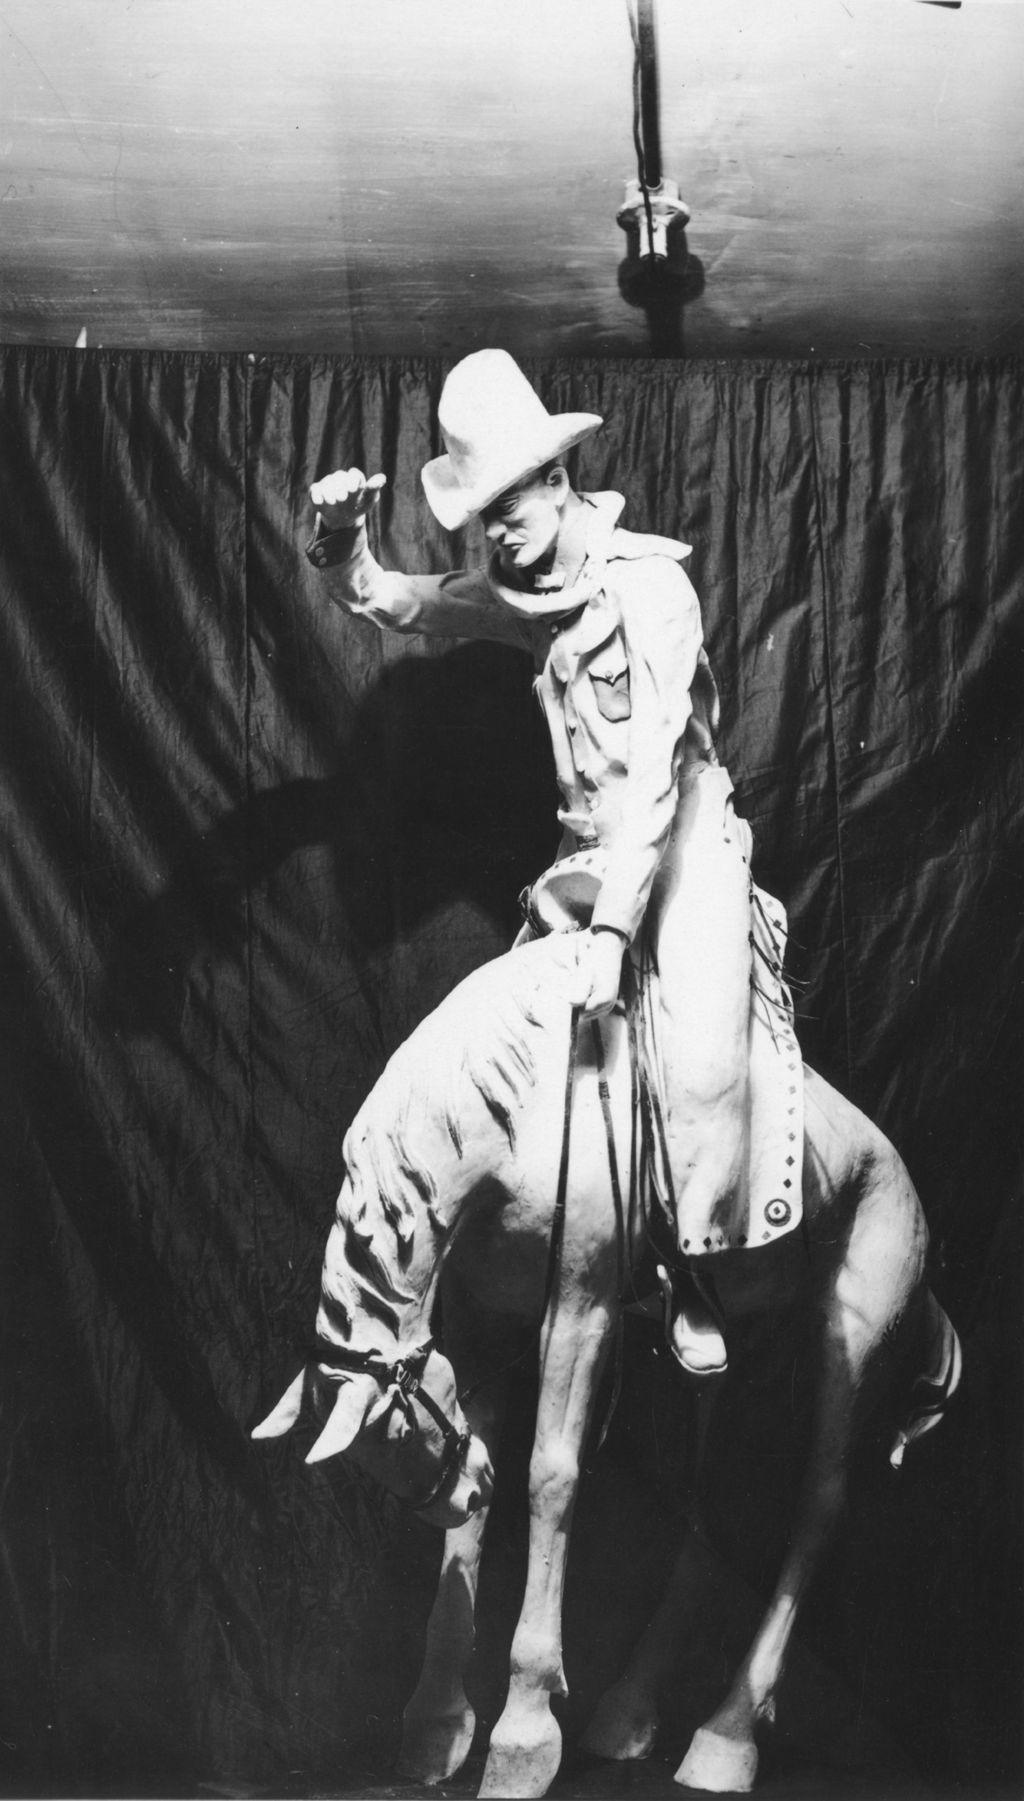 Miniature of Sculptor Wilber Freece created this small statuette of a cowboy riding a bucking bronco from beef suet and rinds.